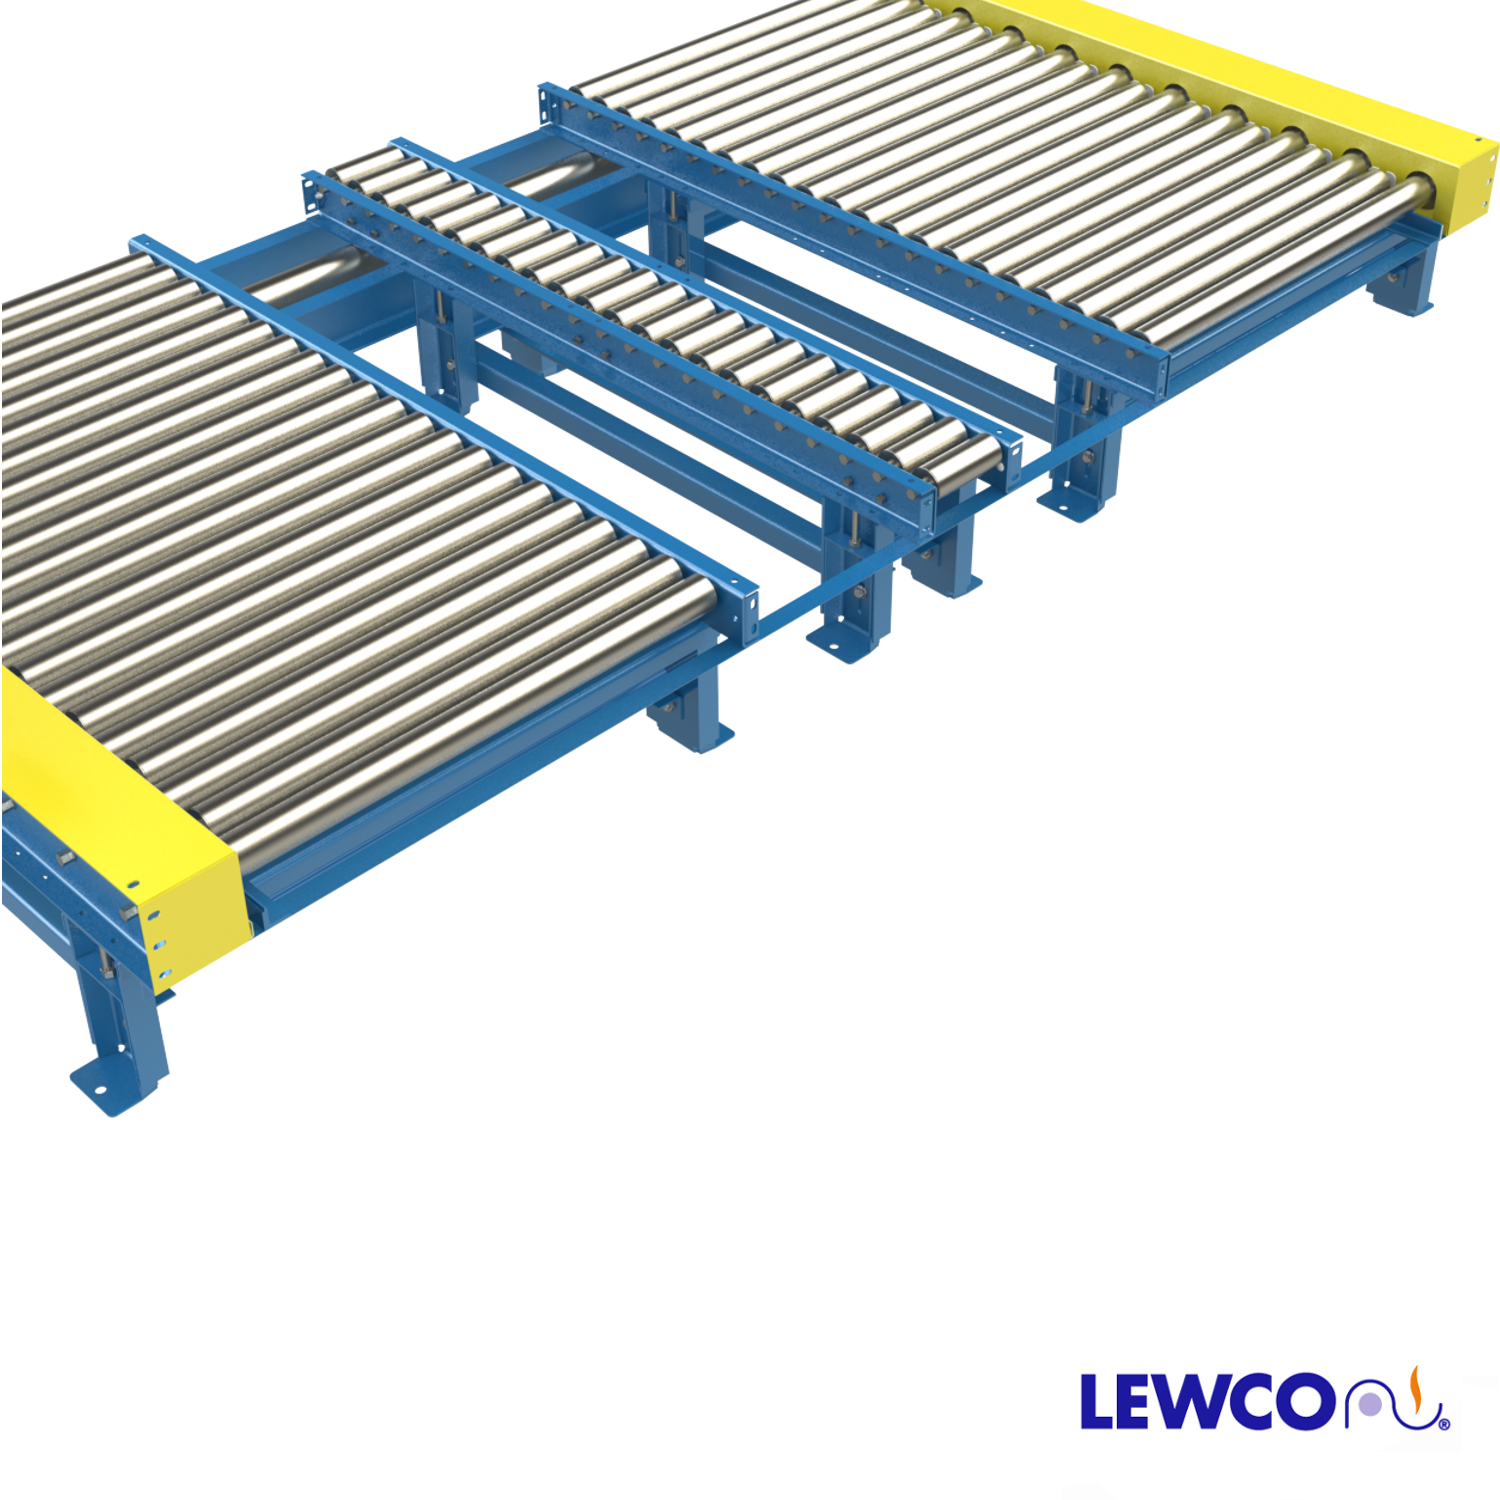 Chain Driven Live Roller Conveyor with Fork Truck Access From Conveyor ...